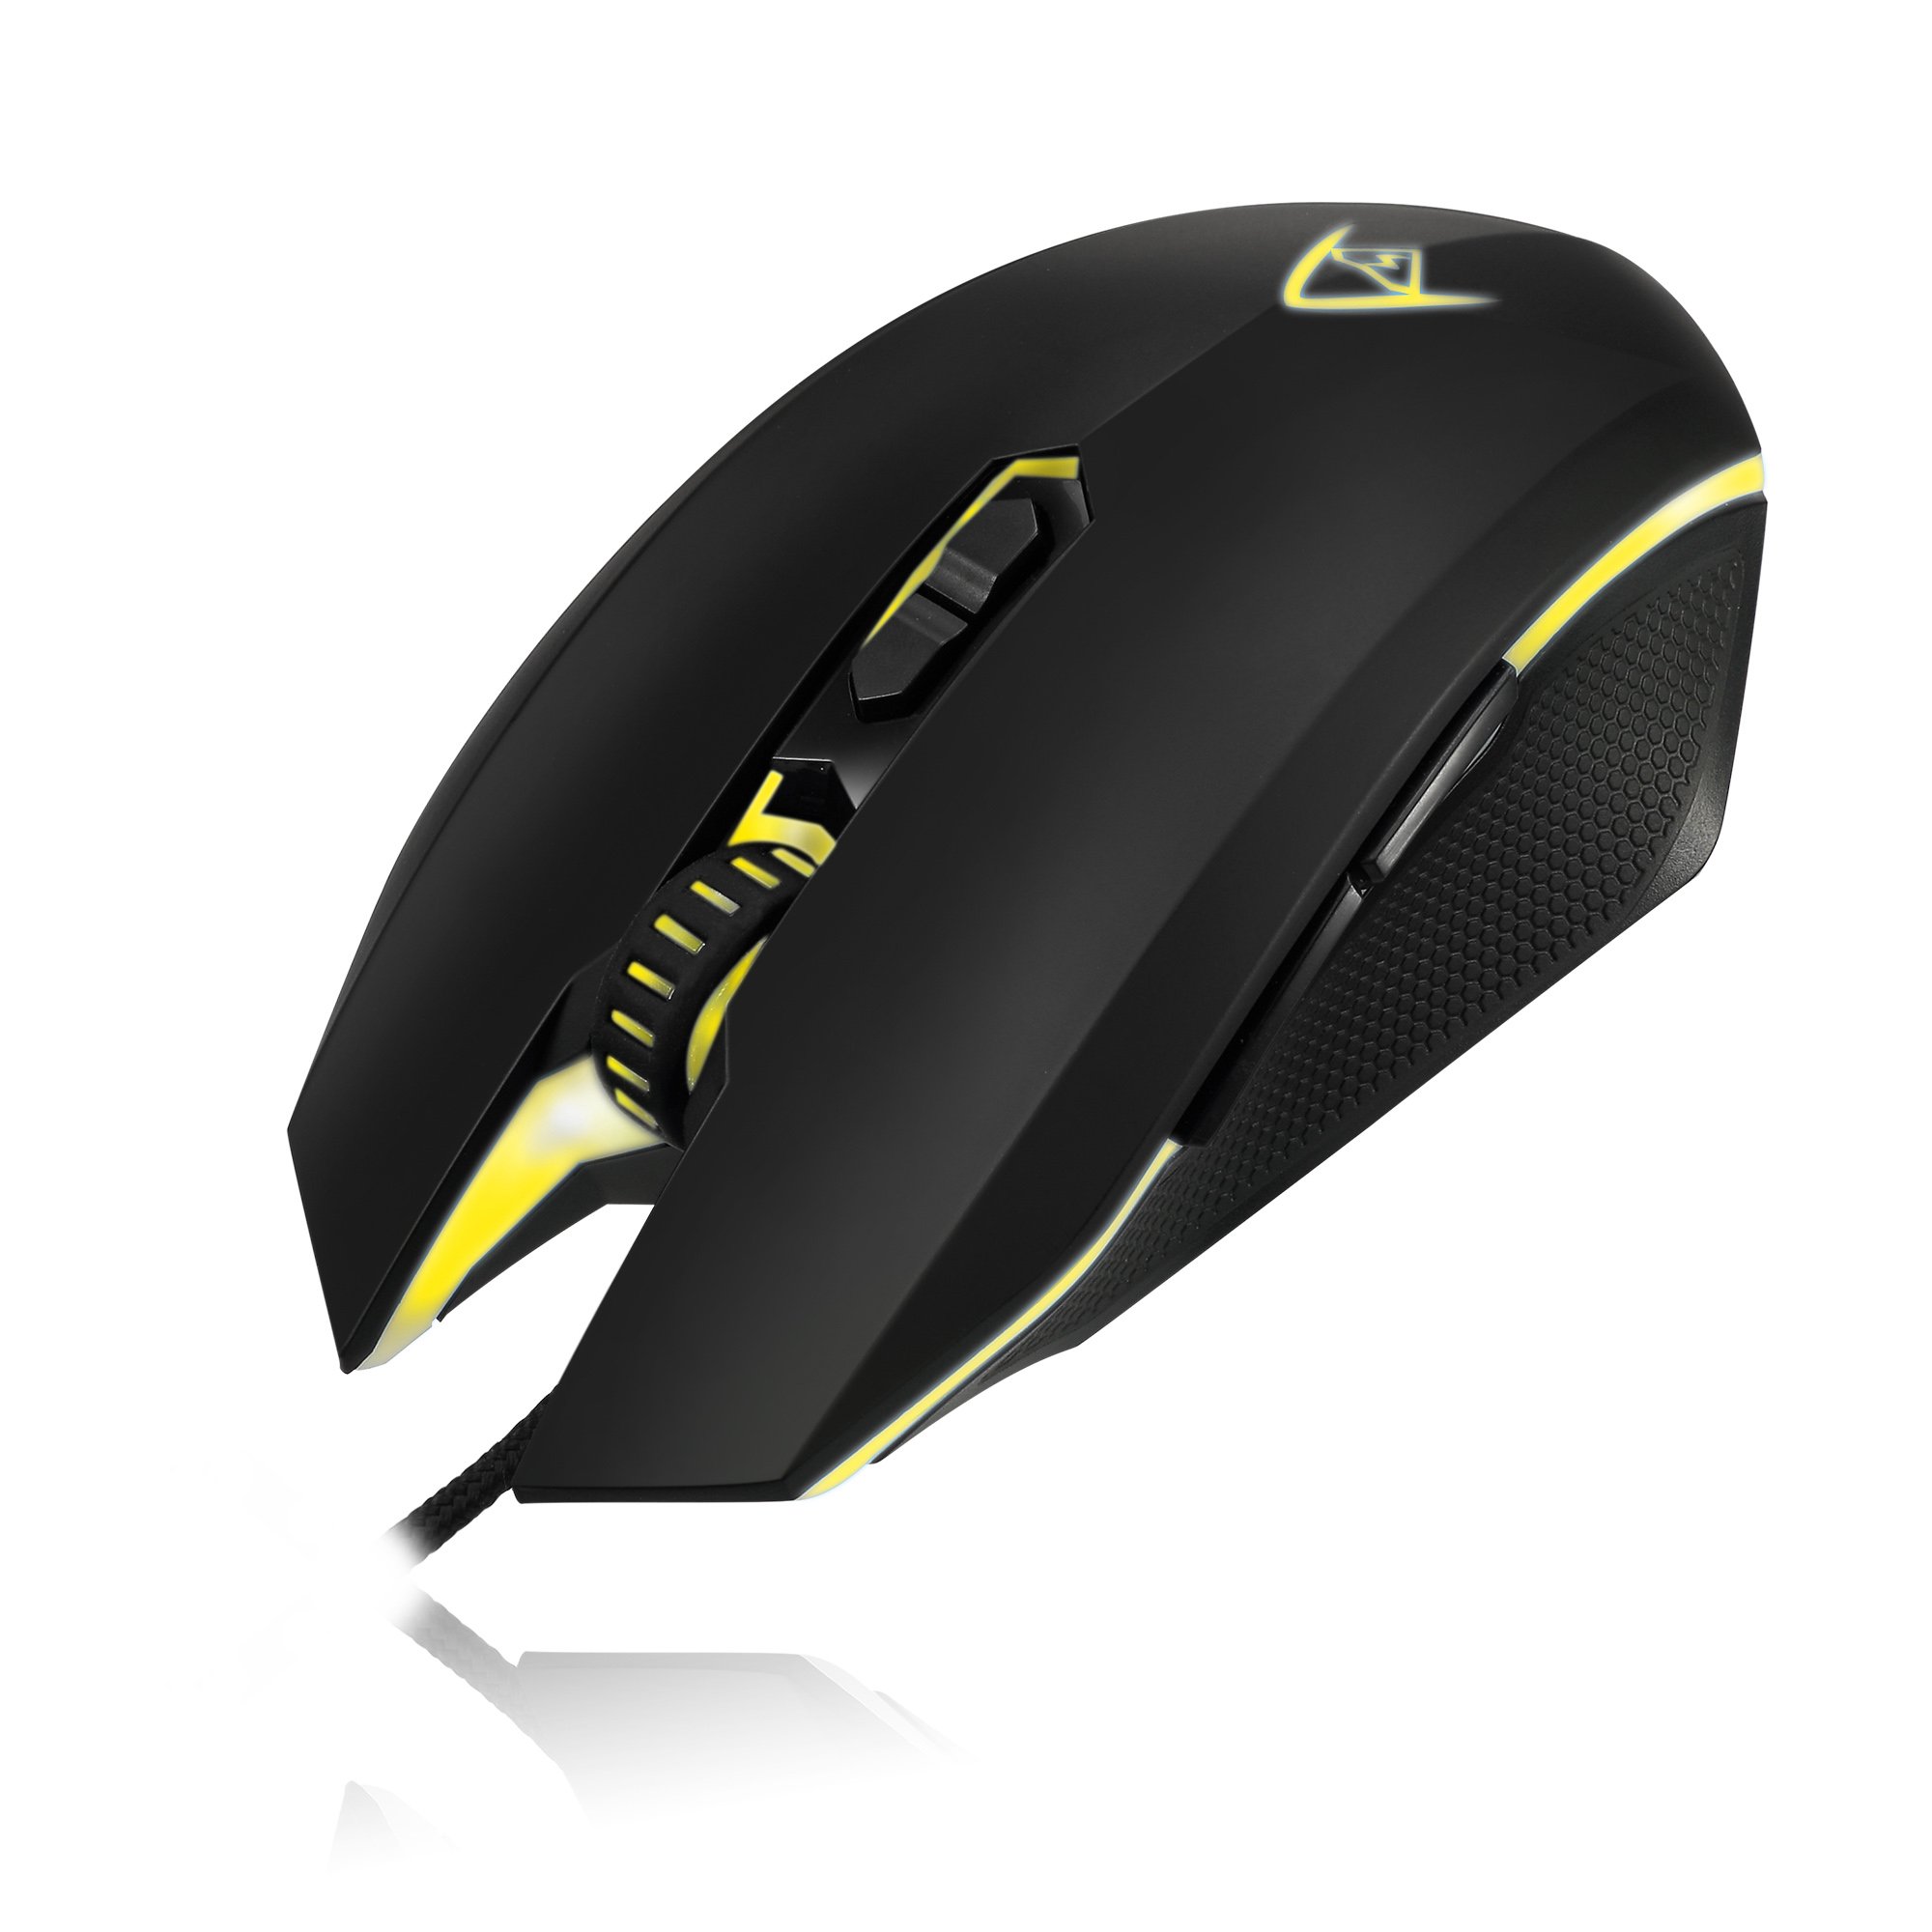 Adesso iMouse X2 Multi-Color 7-Button Programmable Gaming Mouse